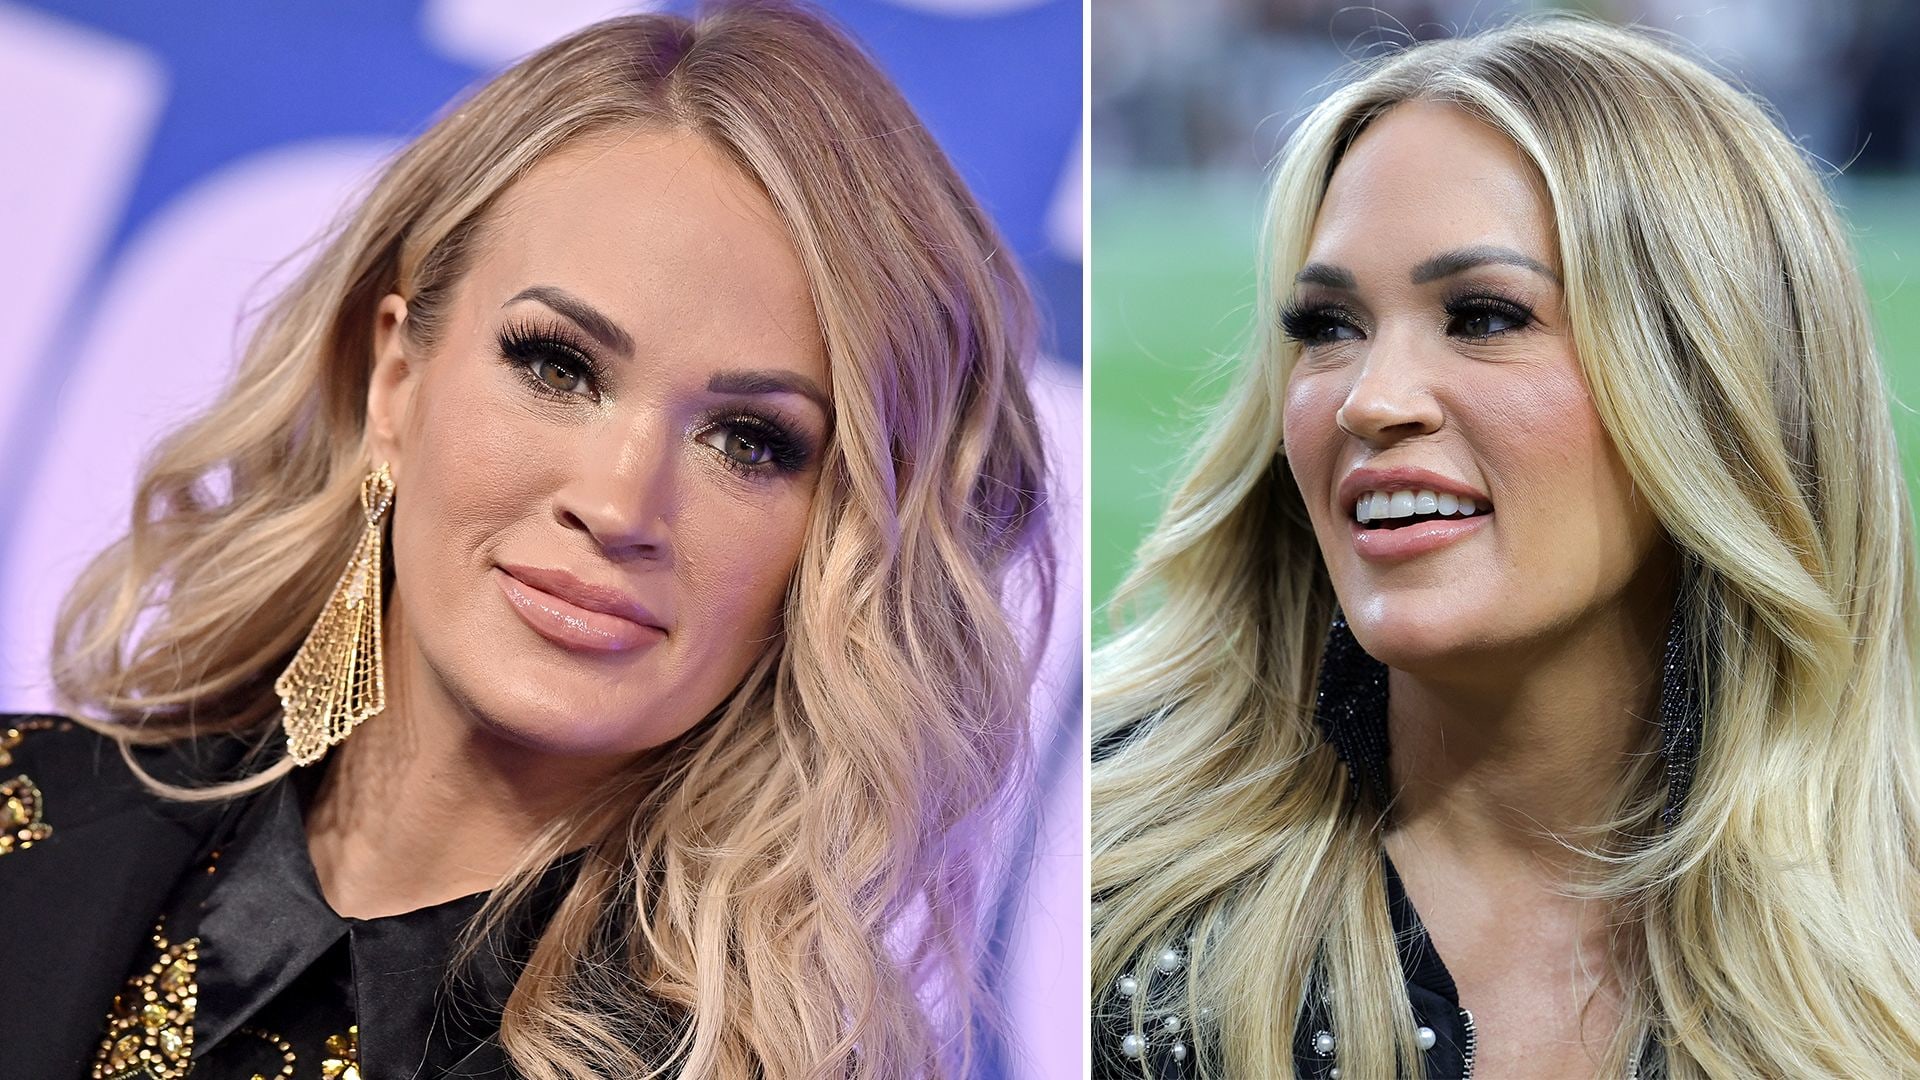 Carrie Underwood still uses this years after 'American Idol